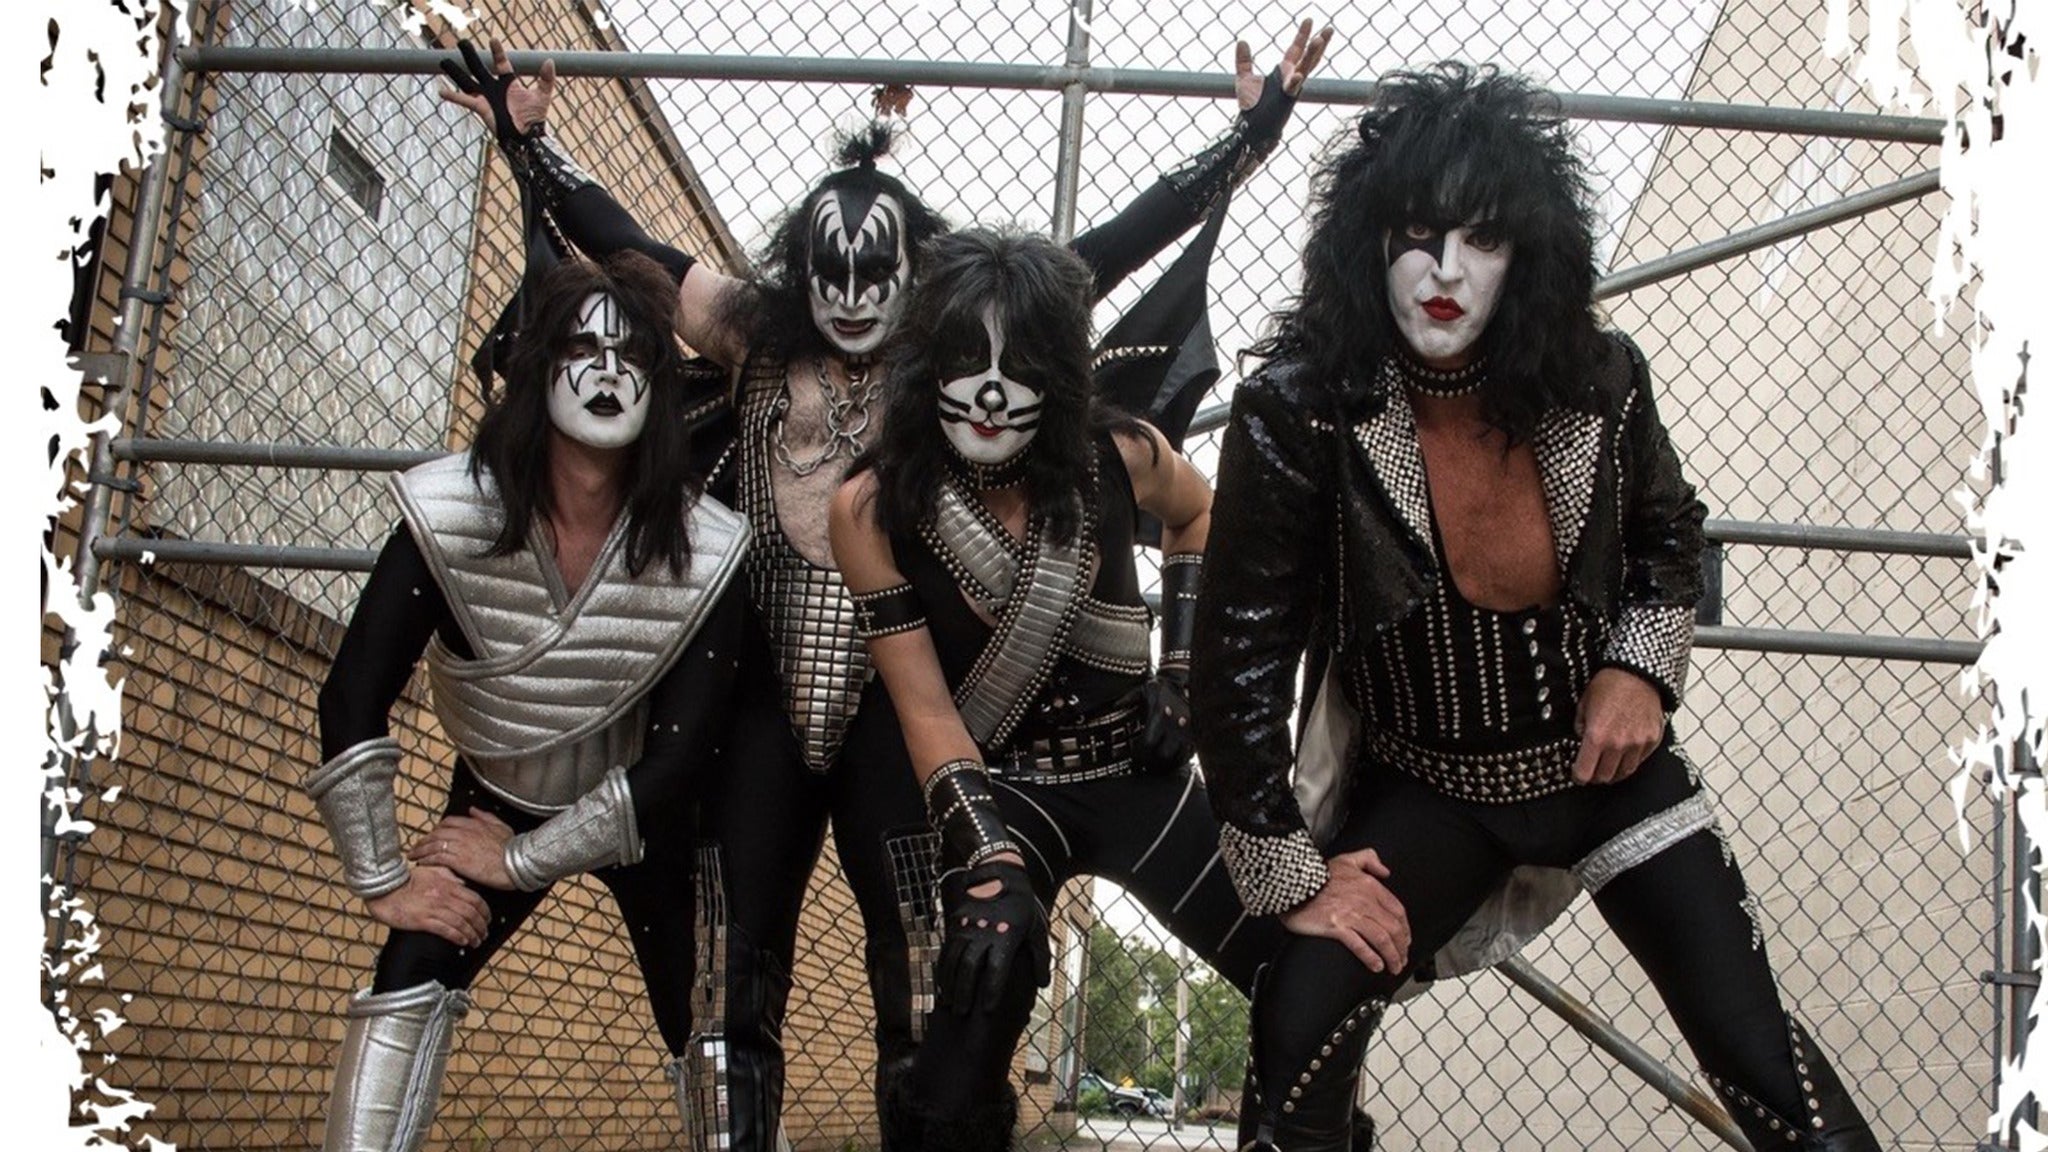 Mr. Speed - A Tribute to Kiss in Cleveland promo photo for Live Nation Mobile App presale offer code